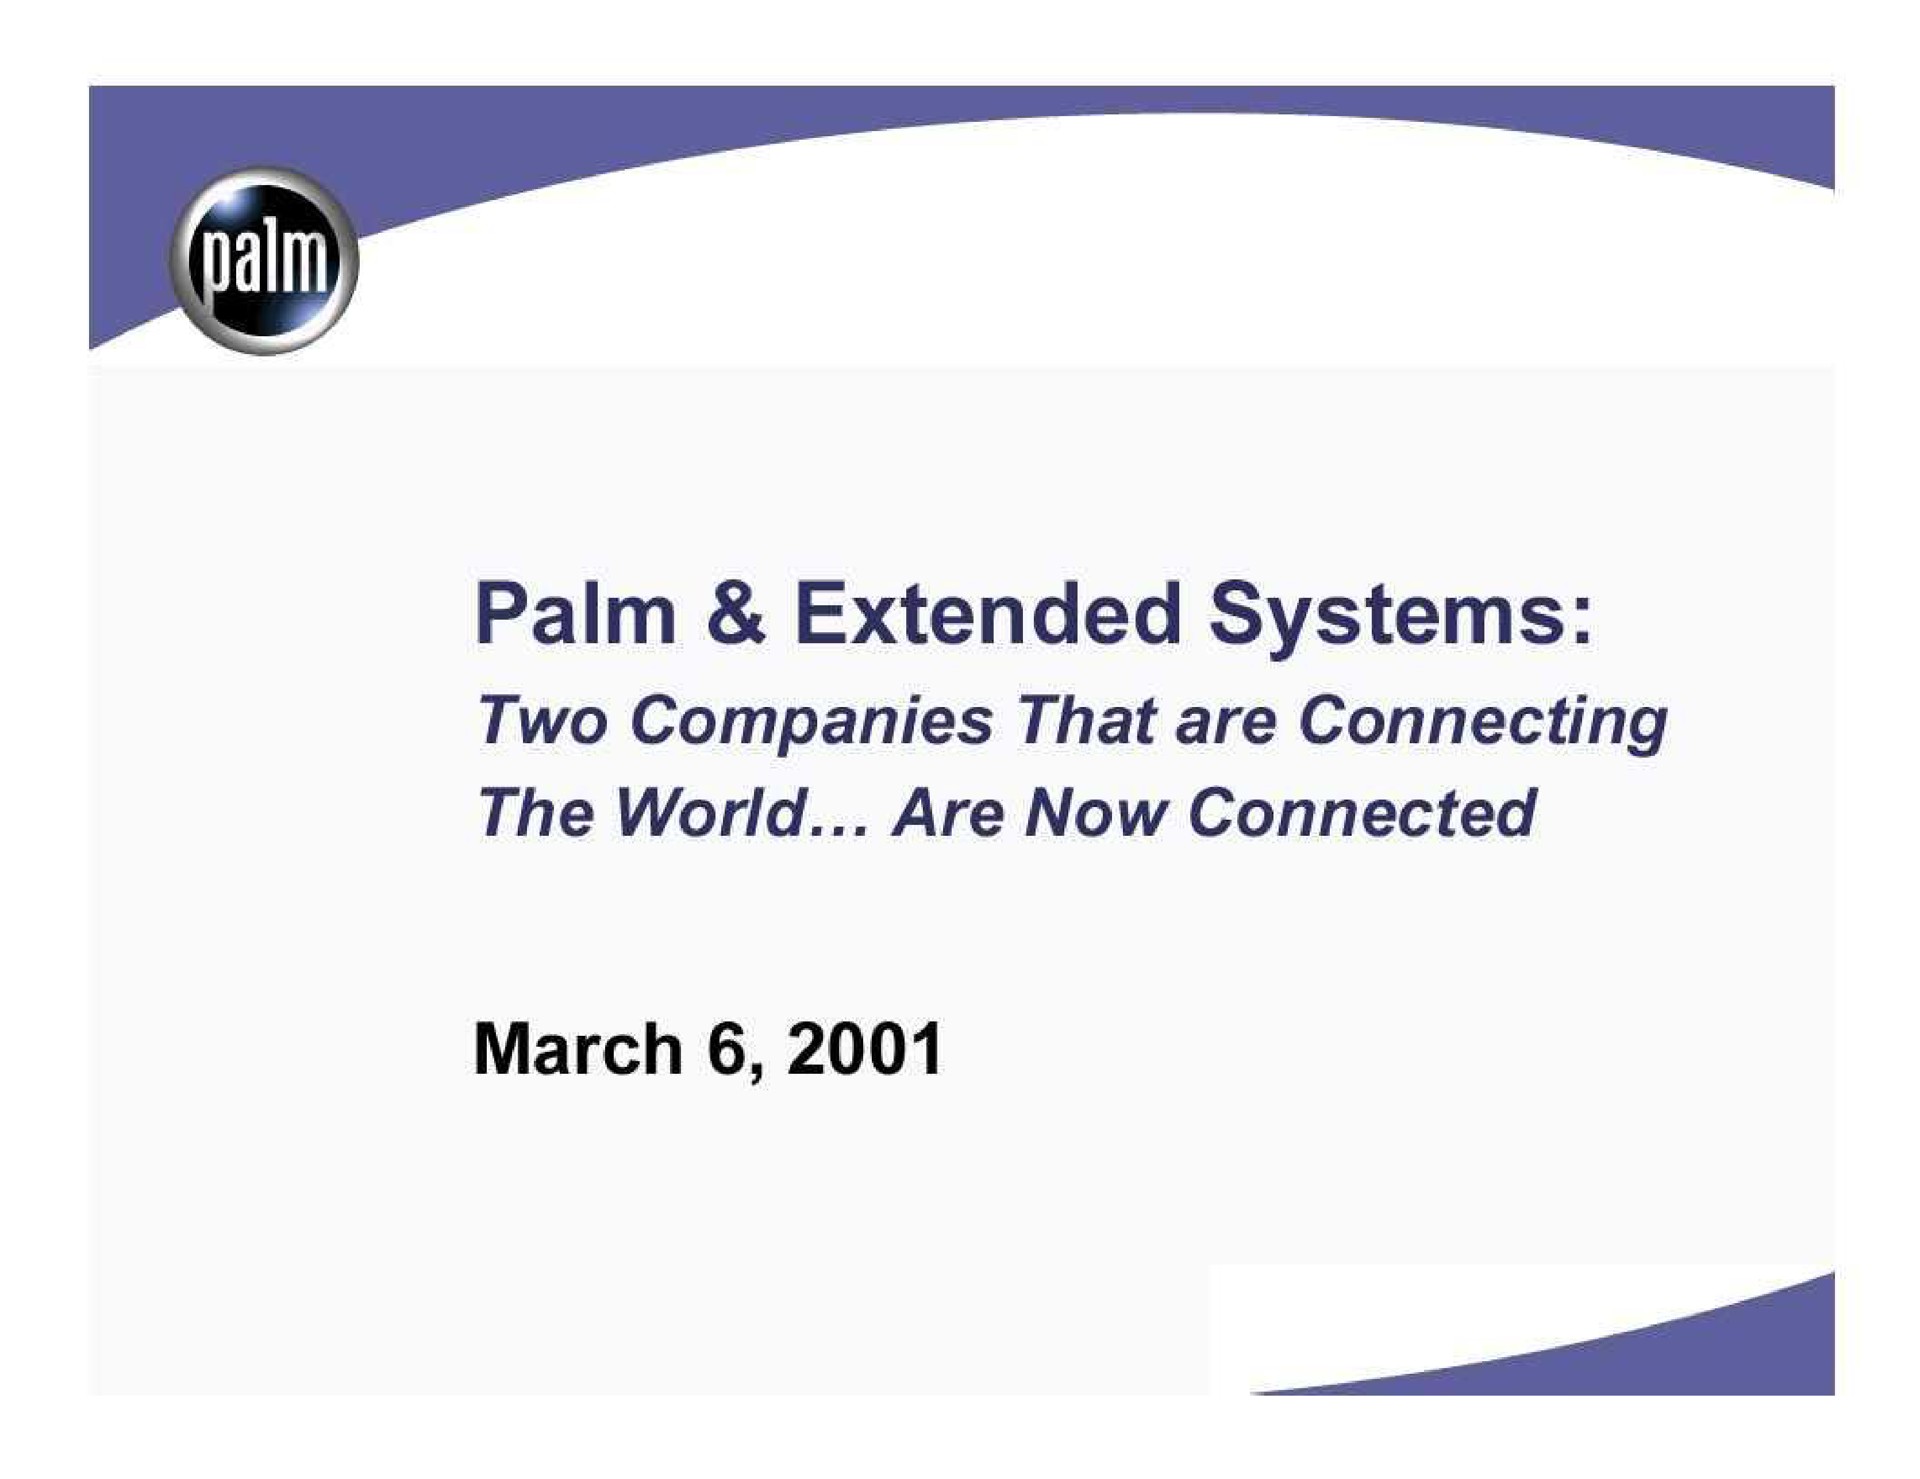 palm extended systems | Palm Inc.